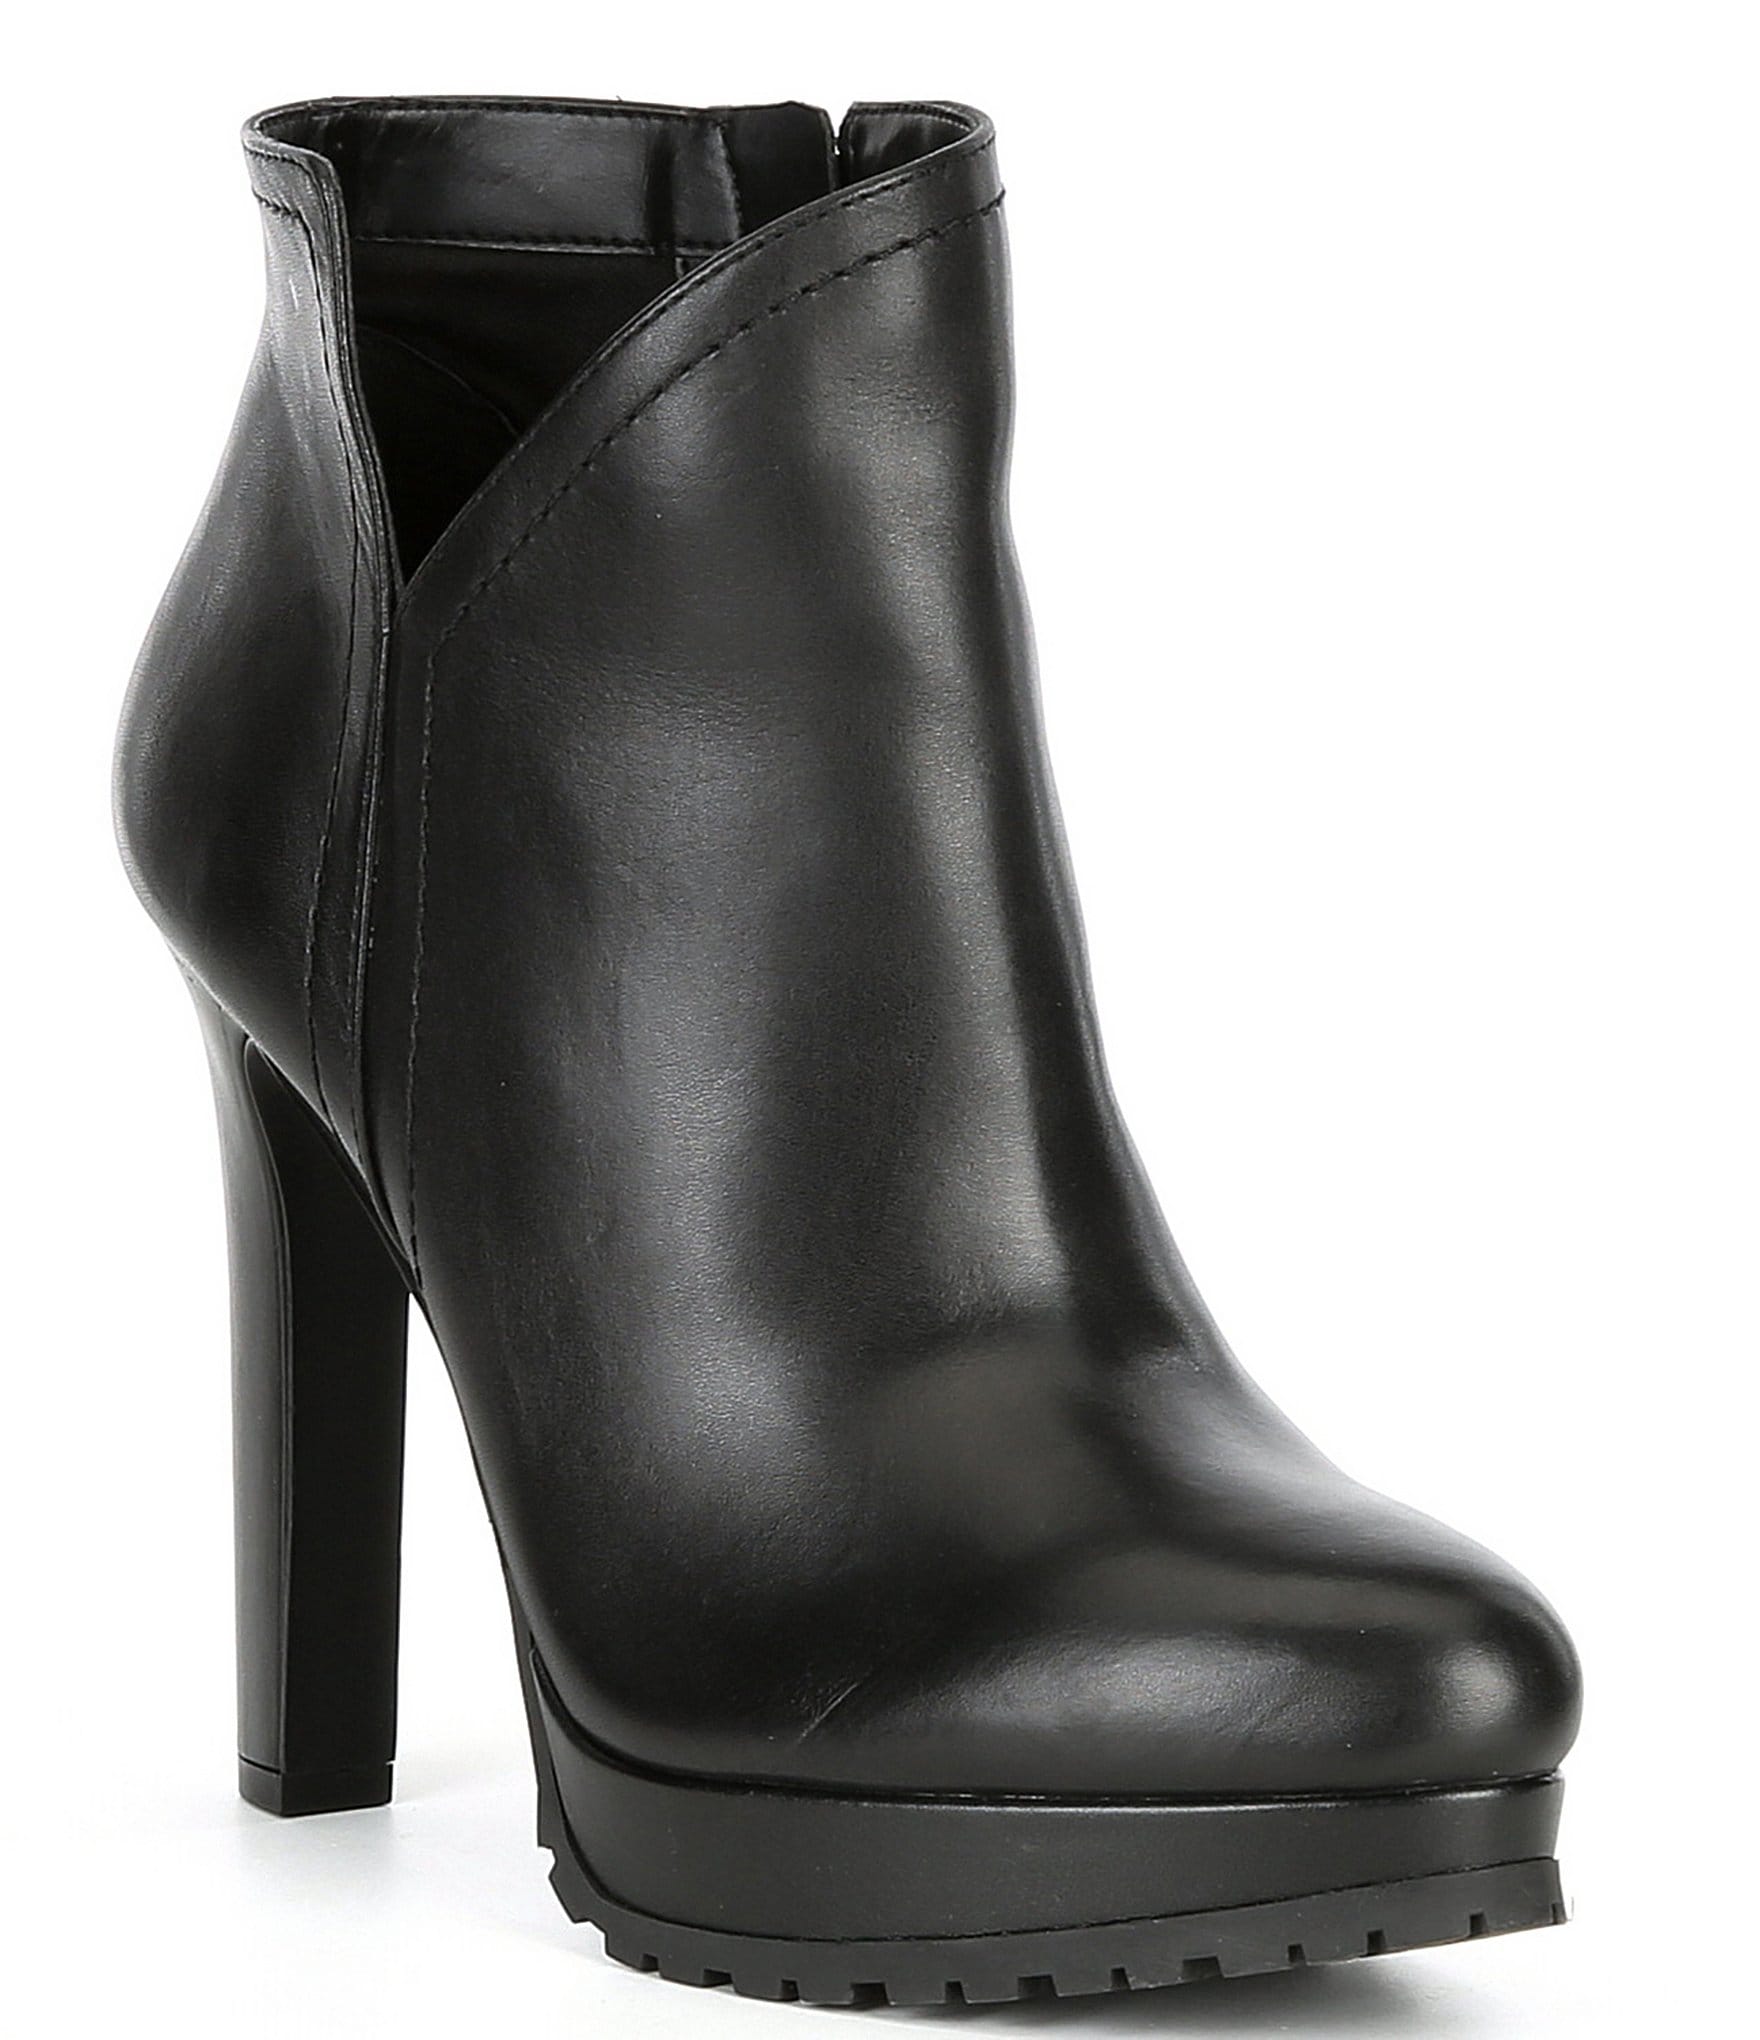 DKNY Toia Leather Lace-Up Platform Booties